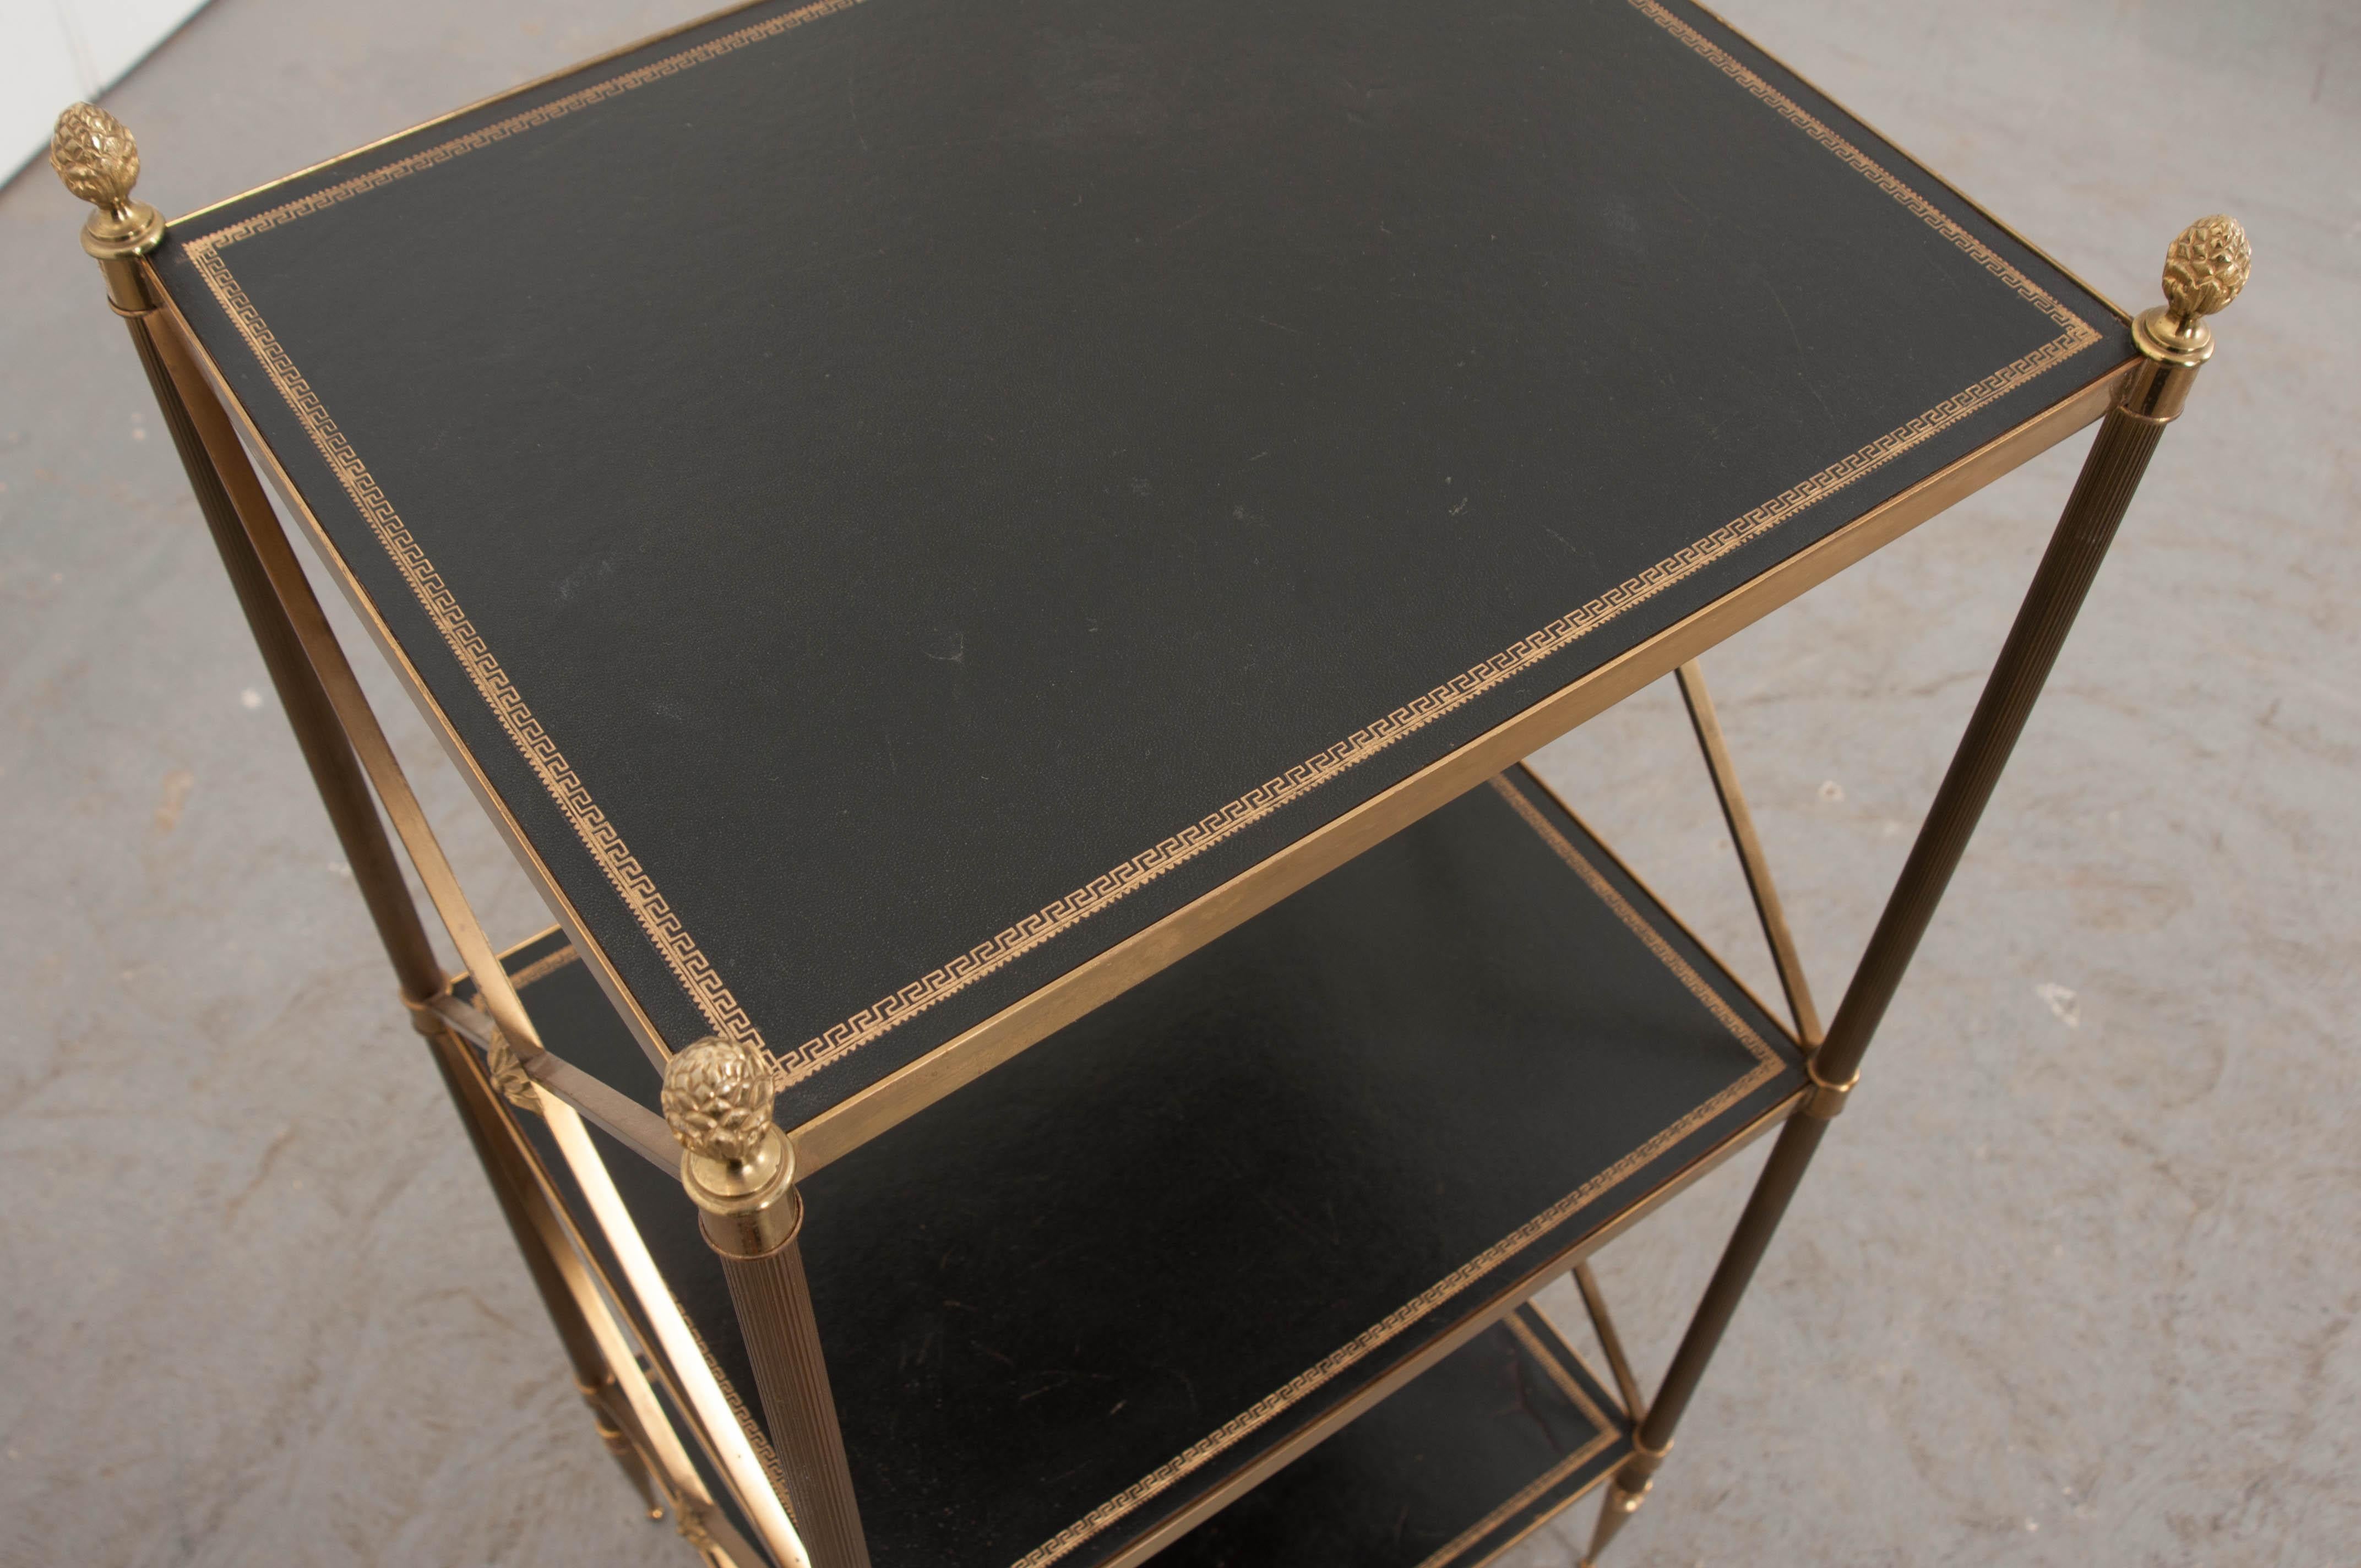 This stylish brass and leather étagère in the Neoclassical taste is from 1920s France and has two shelves lined in brown leather separated by a brass frame with acorn finials, x-form supports and arrow feet.